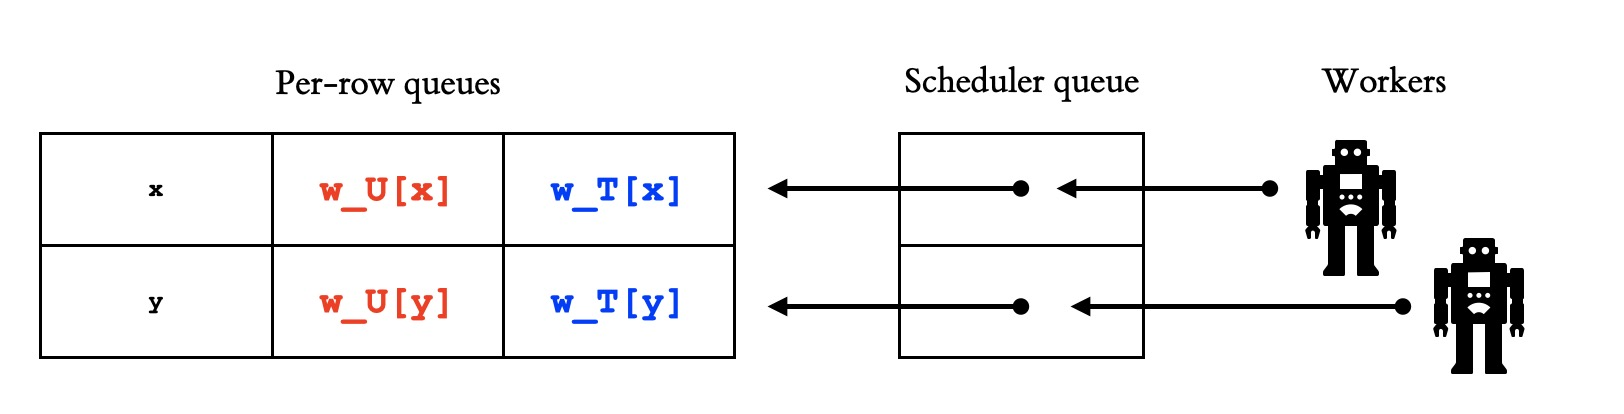 On the left is the same pair of queues as before. In the middle a queue labeled “scheduler queue”. Its first slot points to the queue for X, its second slot points to the queue for Y. On the right are two workers, shown as science fiction robots. An arrow points from each robot to a slow in the scheduler queue.